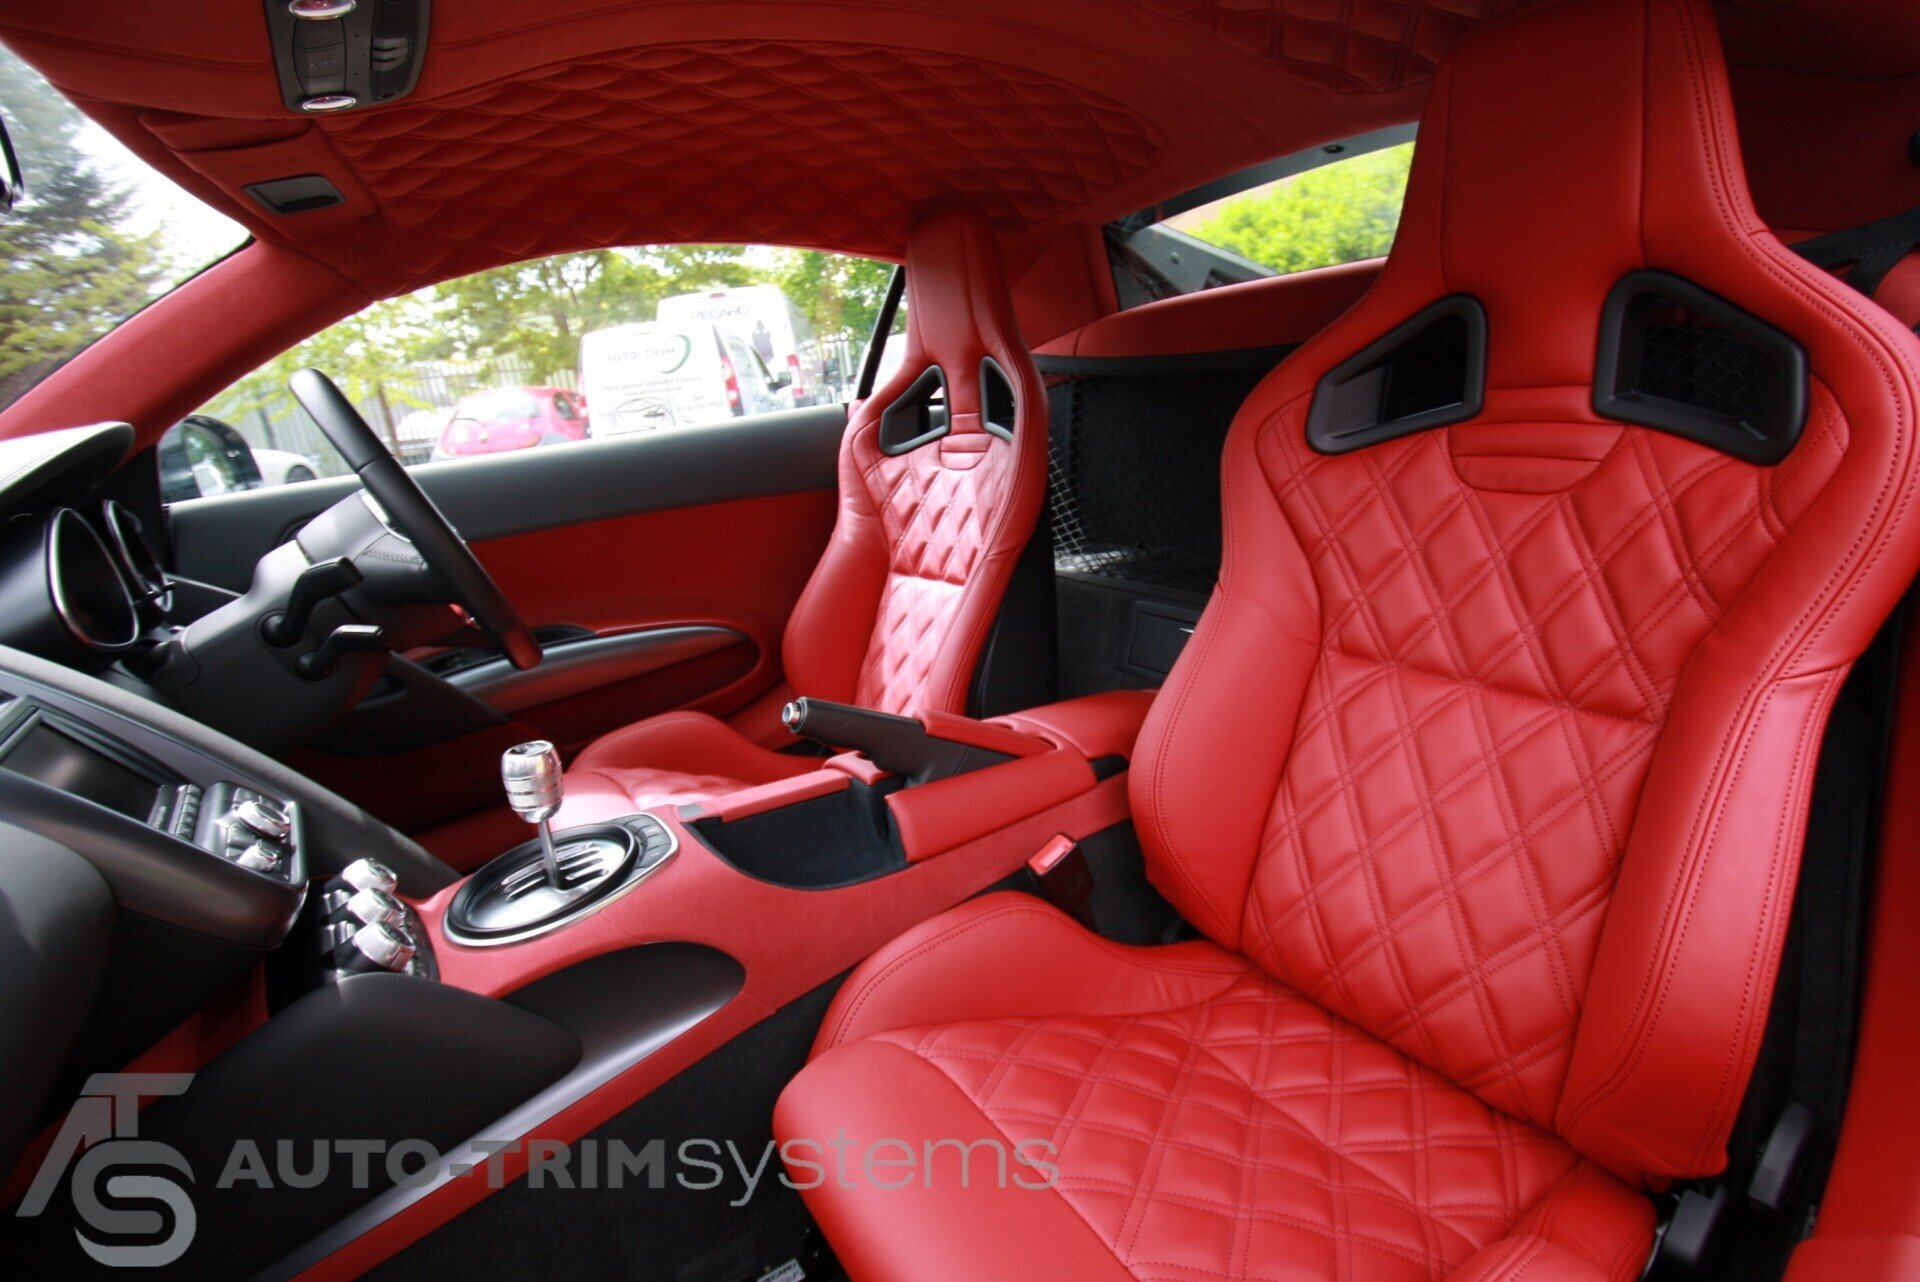 Recaro seats in red leather upholstery with diamond stitching in Audi R8